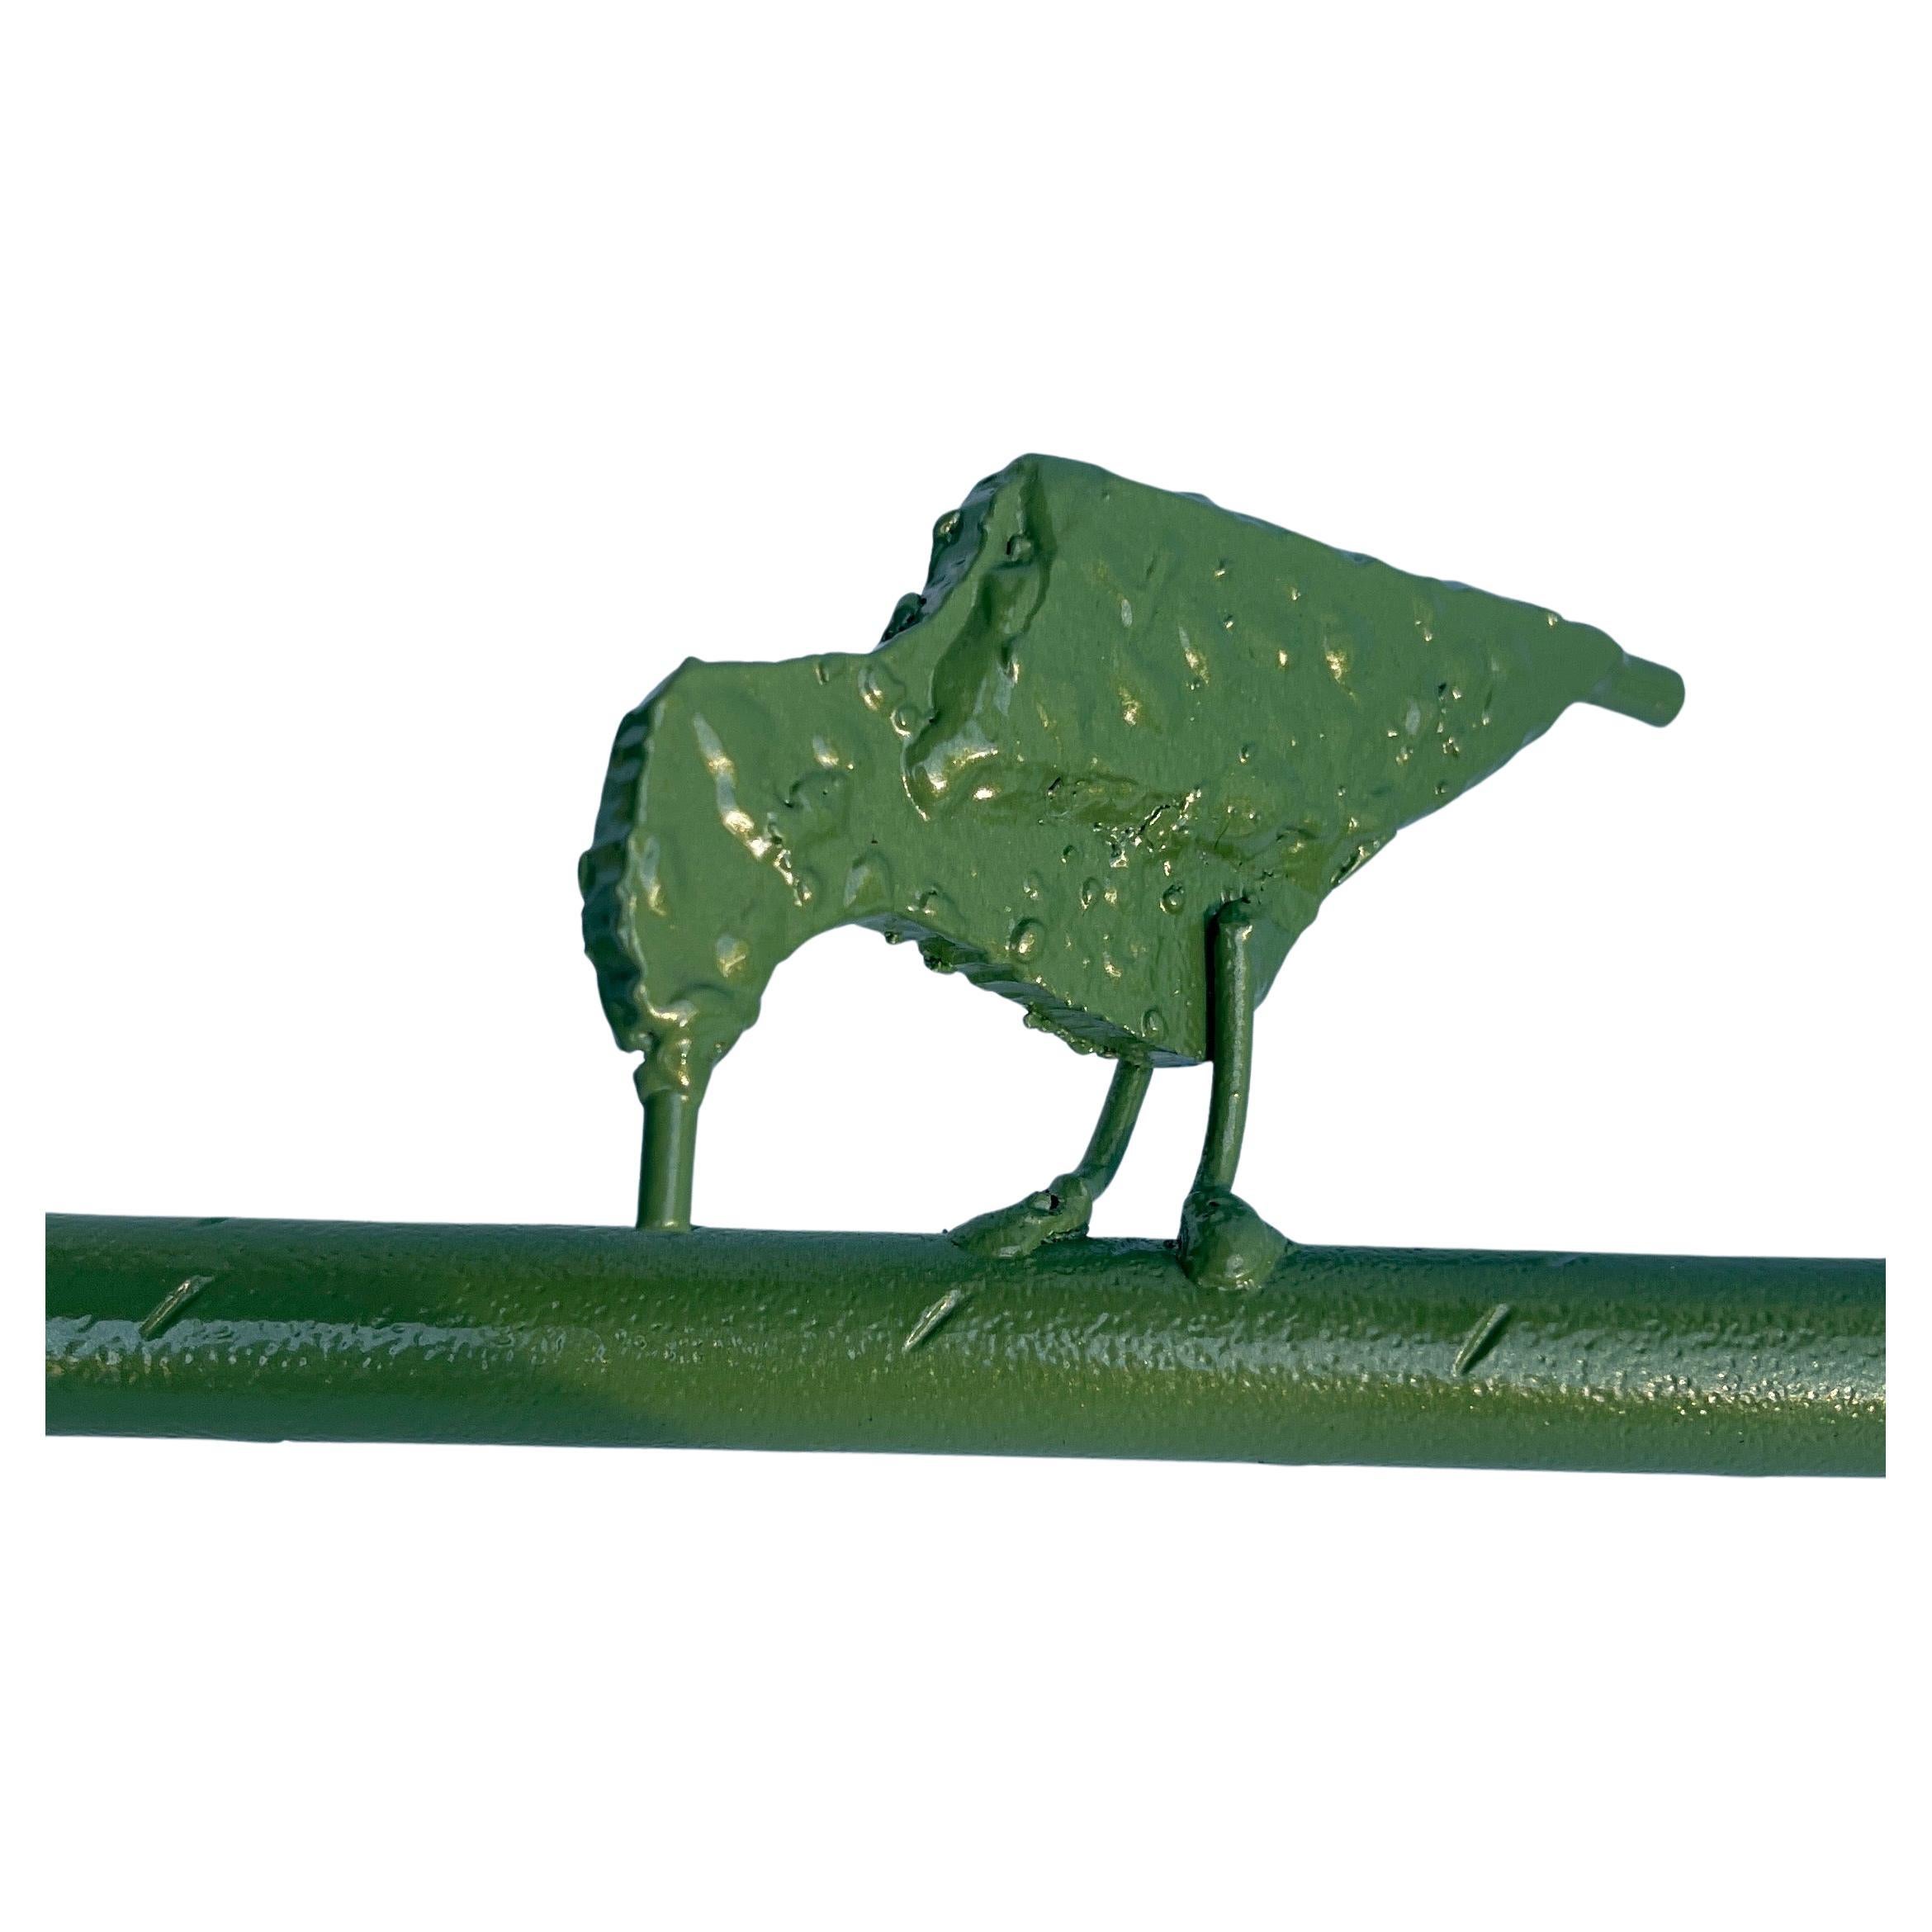 Hand-Crafted Iron Wall Bar Rod With Birds, Green Powder-Coated In Good Condition For Sale In Haddonfield, NJ